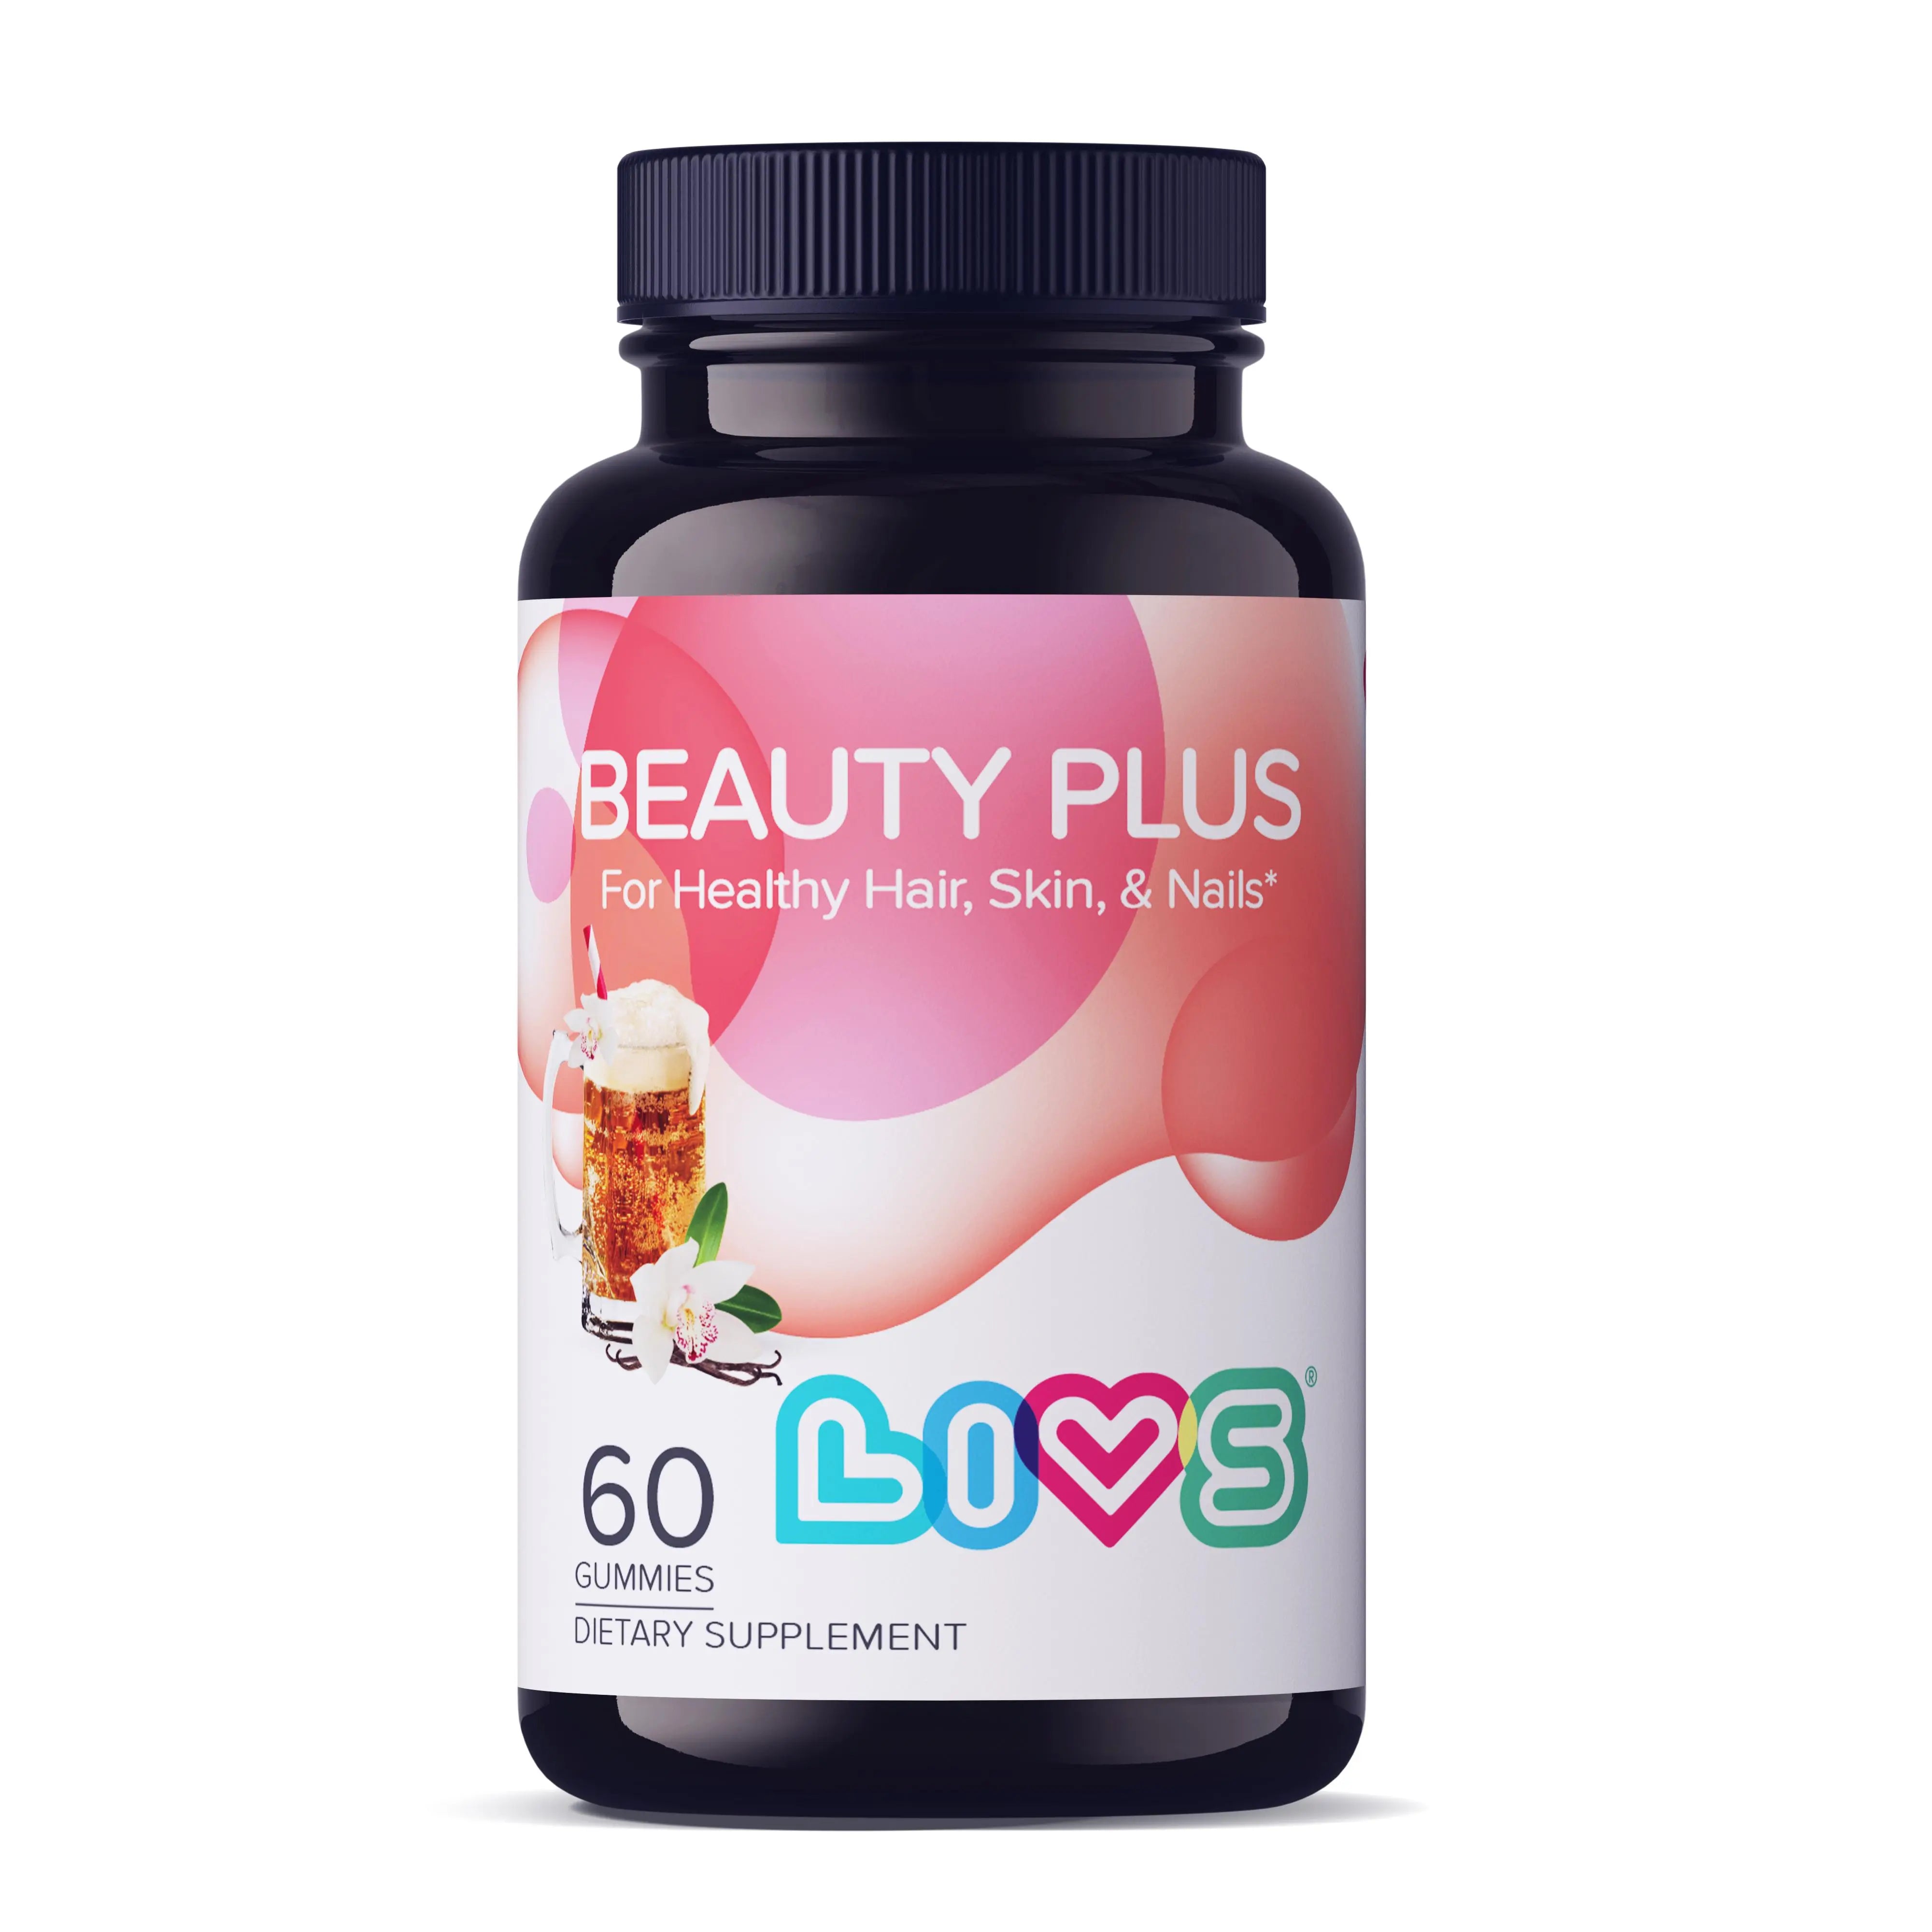 Beauty Plus (healthy hair, skin, and nails) LIVS